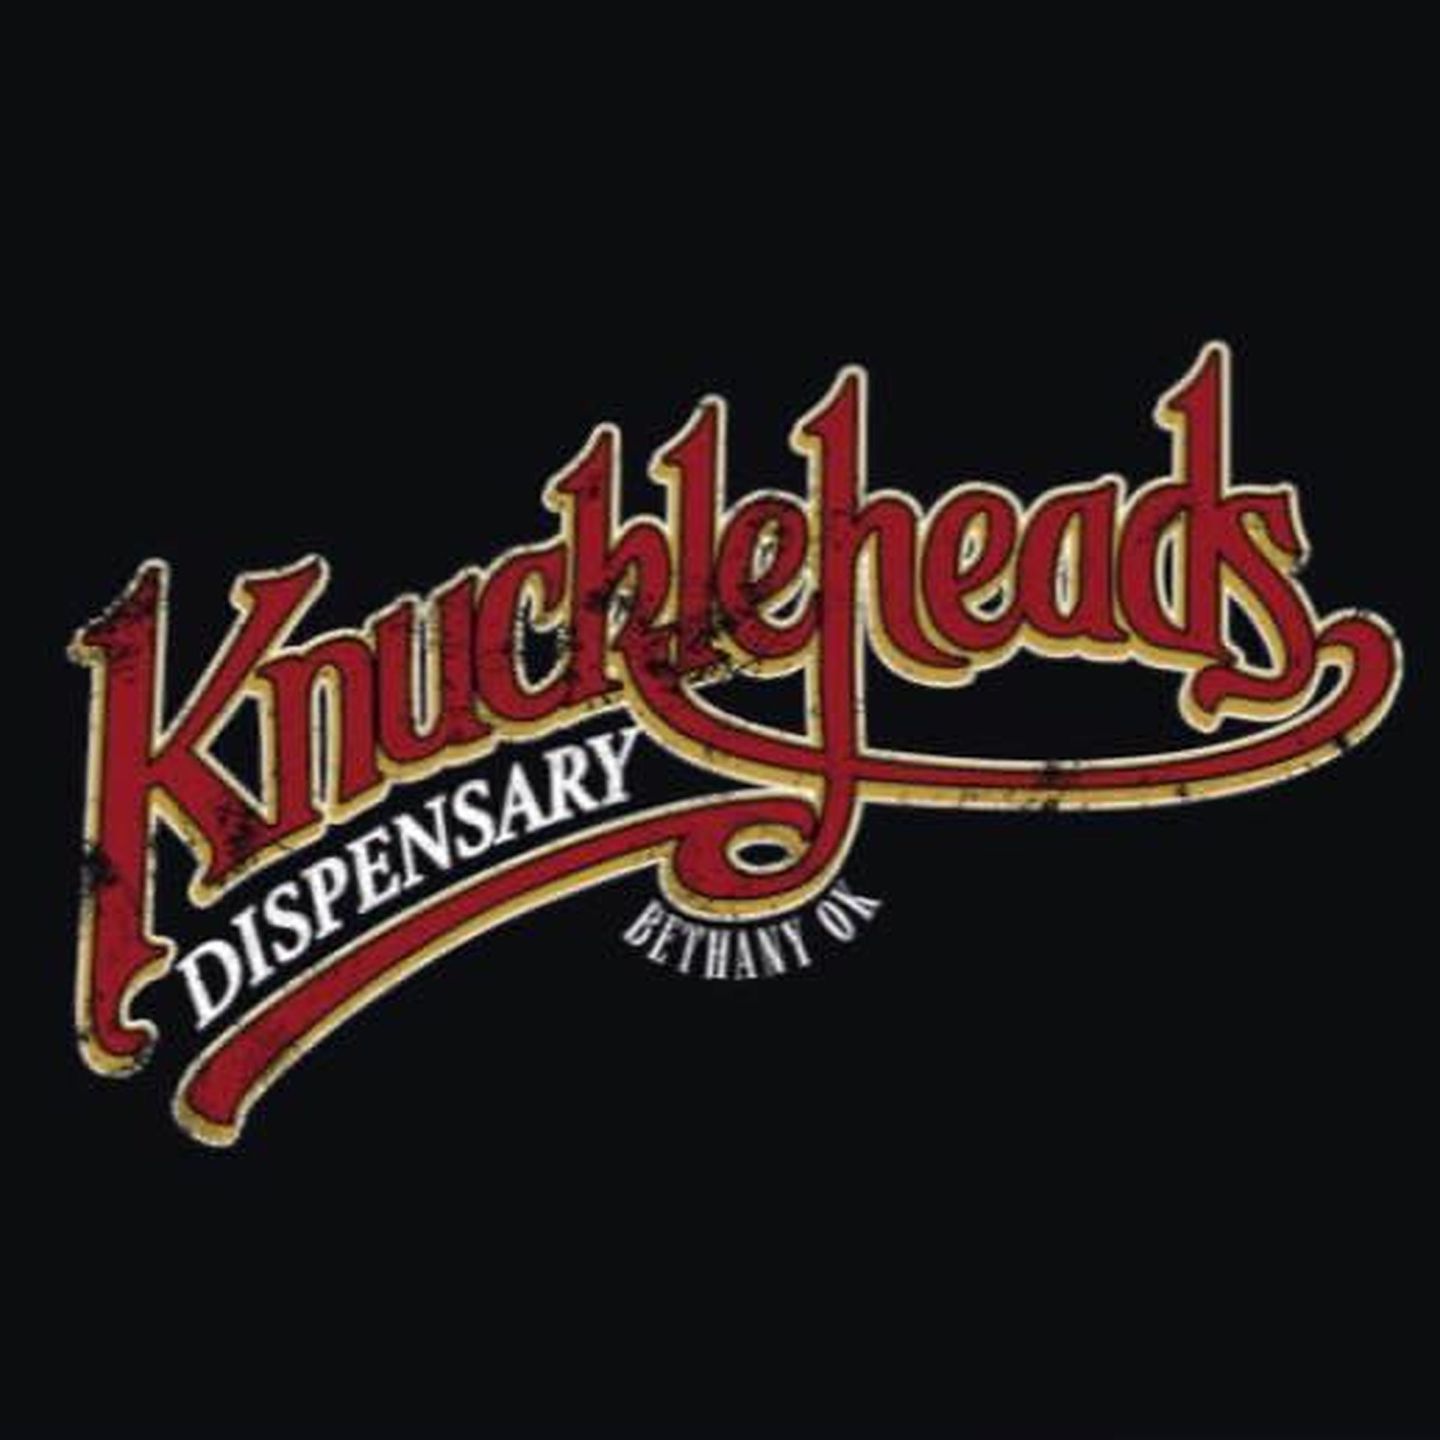 image feature Knuckleheads Dispensary